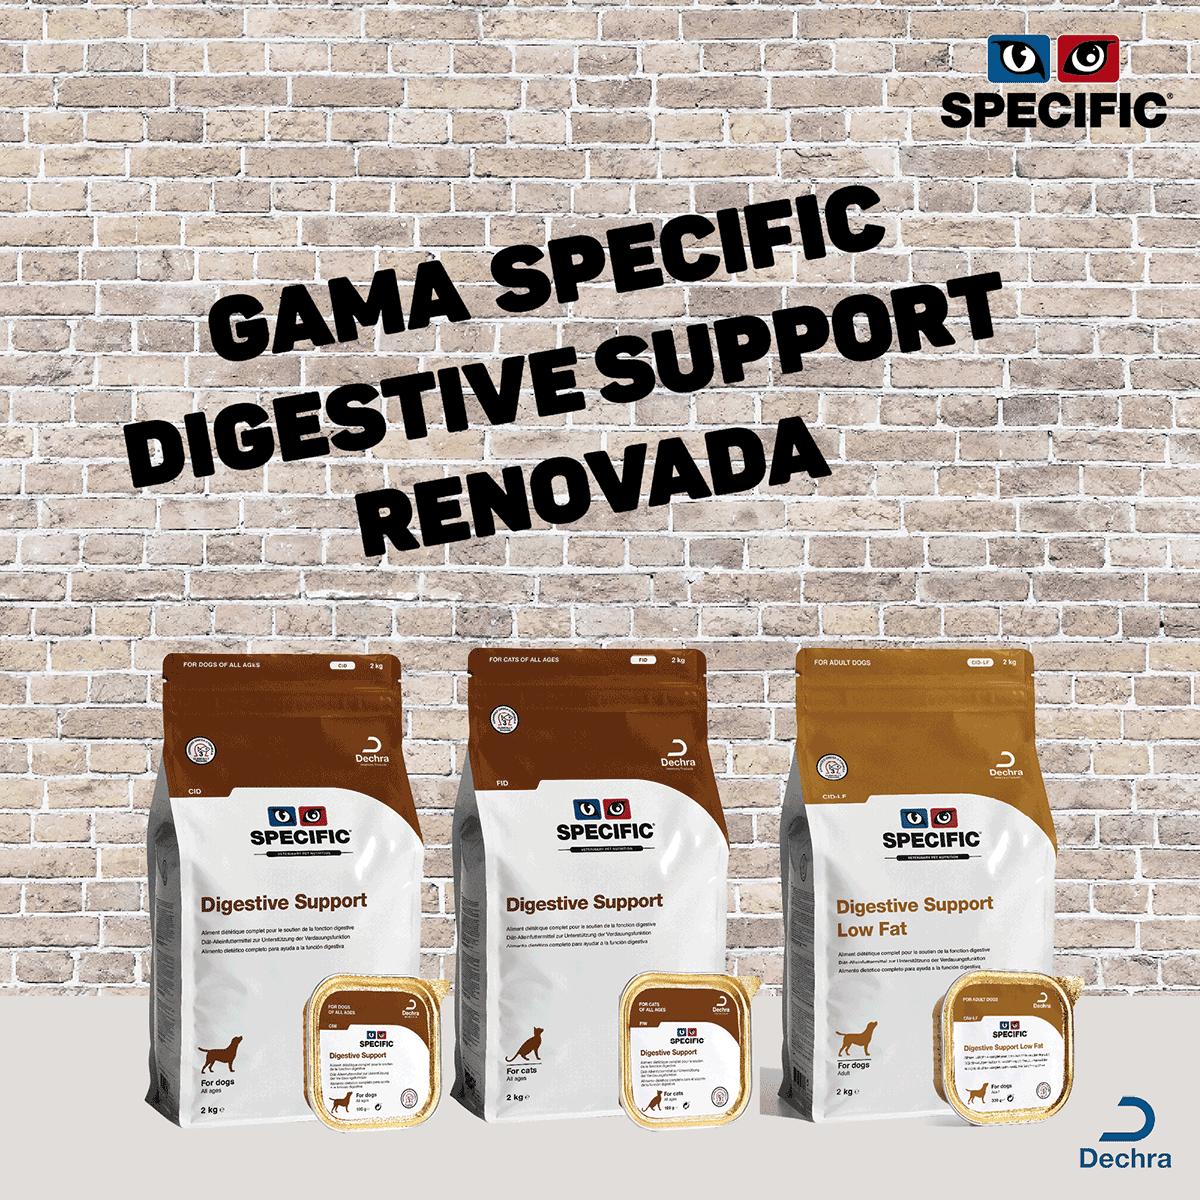 Gama SPECIFIC DIGESTIVE SUPPORT renovada